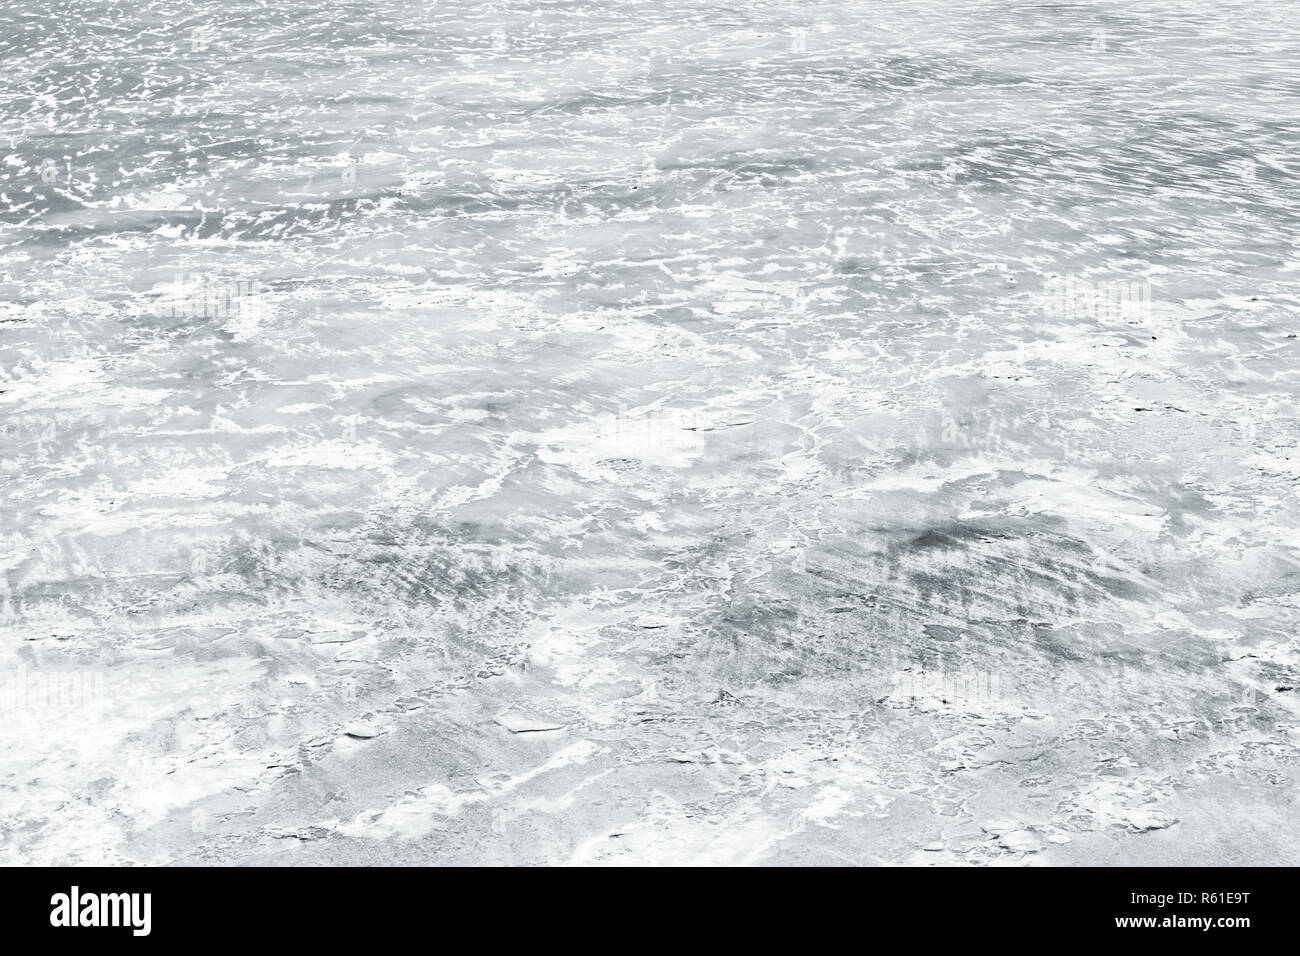 Ice rink covered with show on frozen river in winter season, natural background photo texture Stock Photo